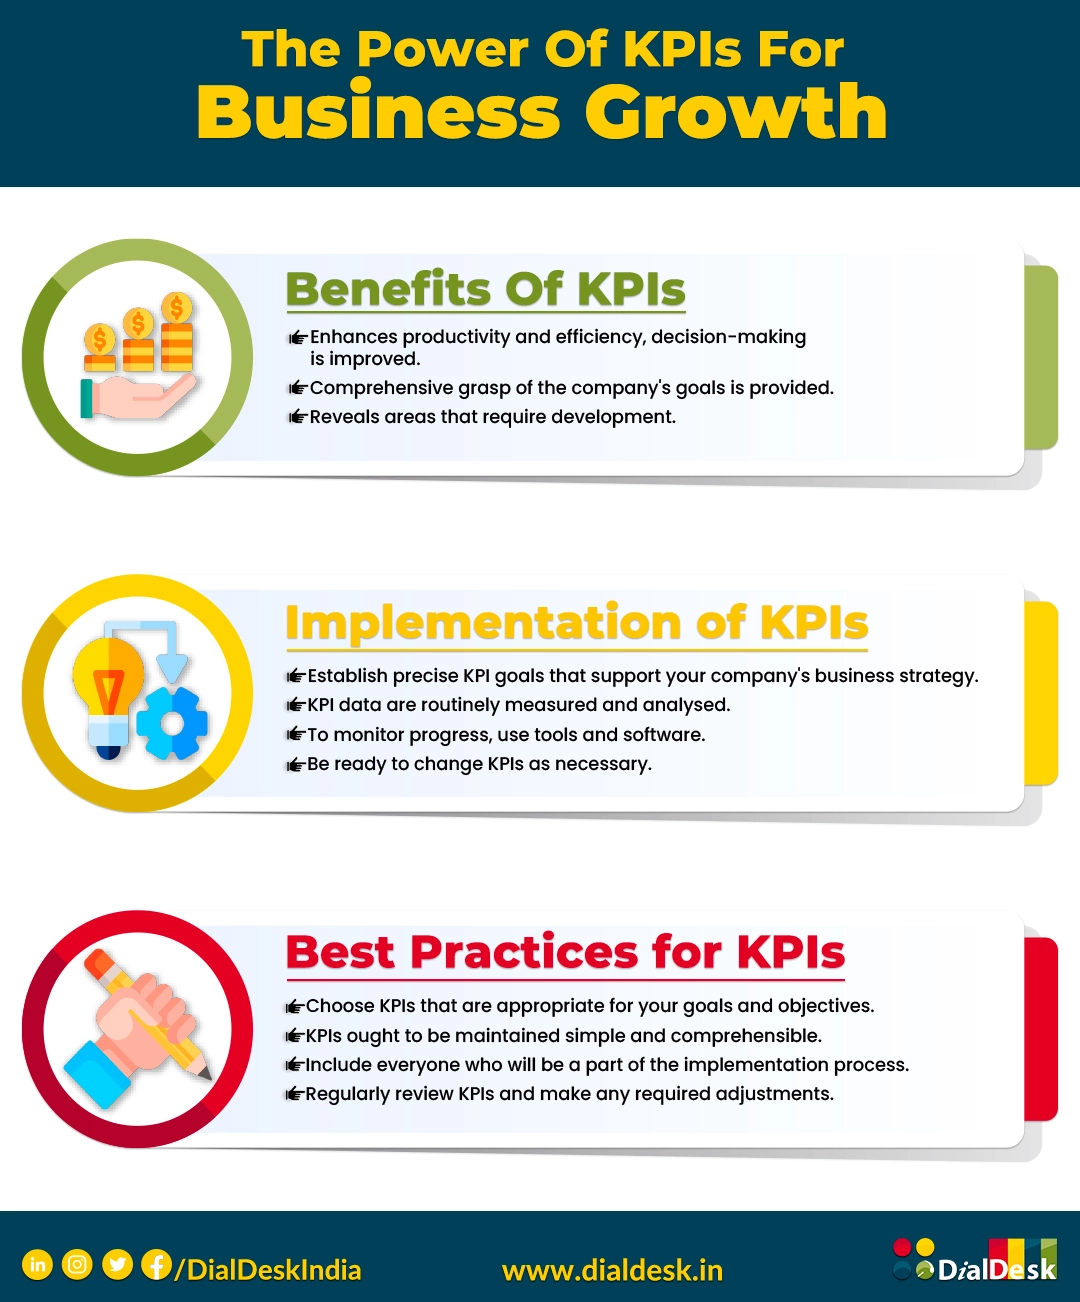 The Power of KPIs for Business Growth